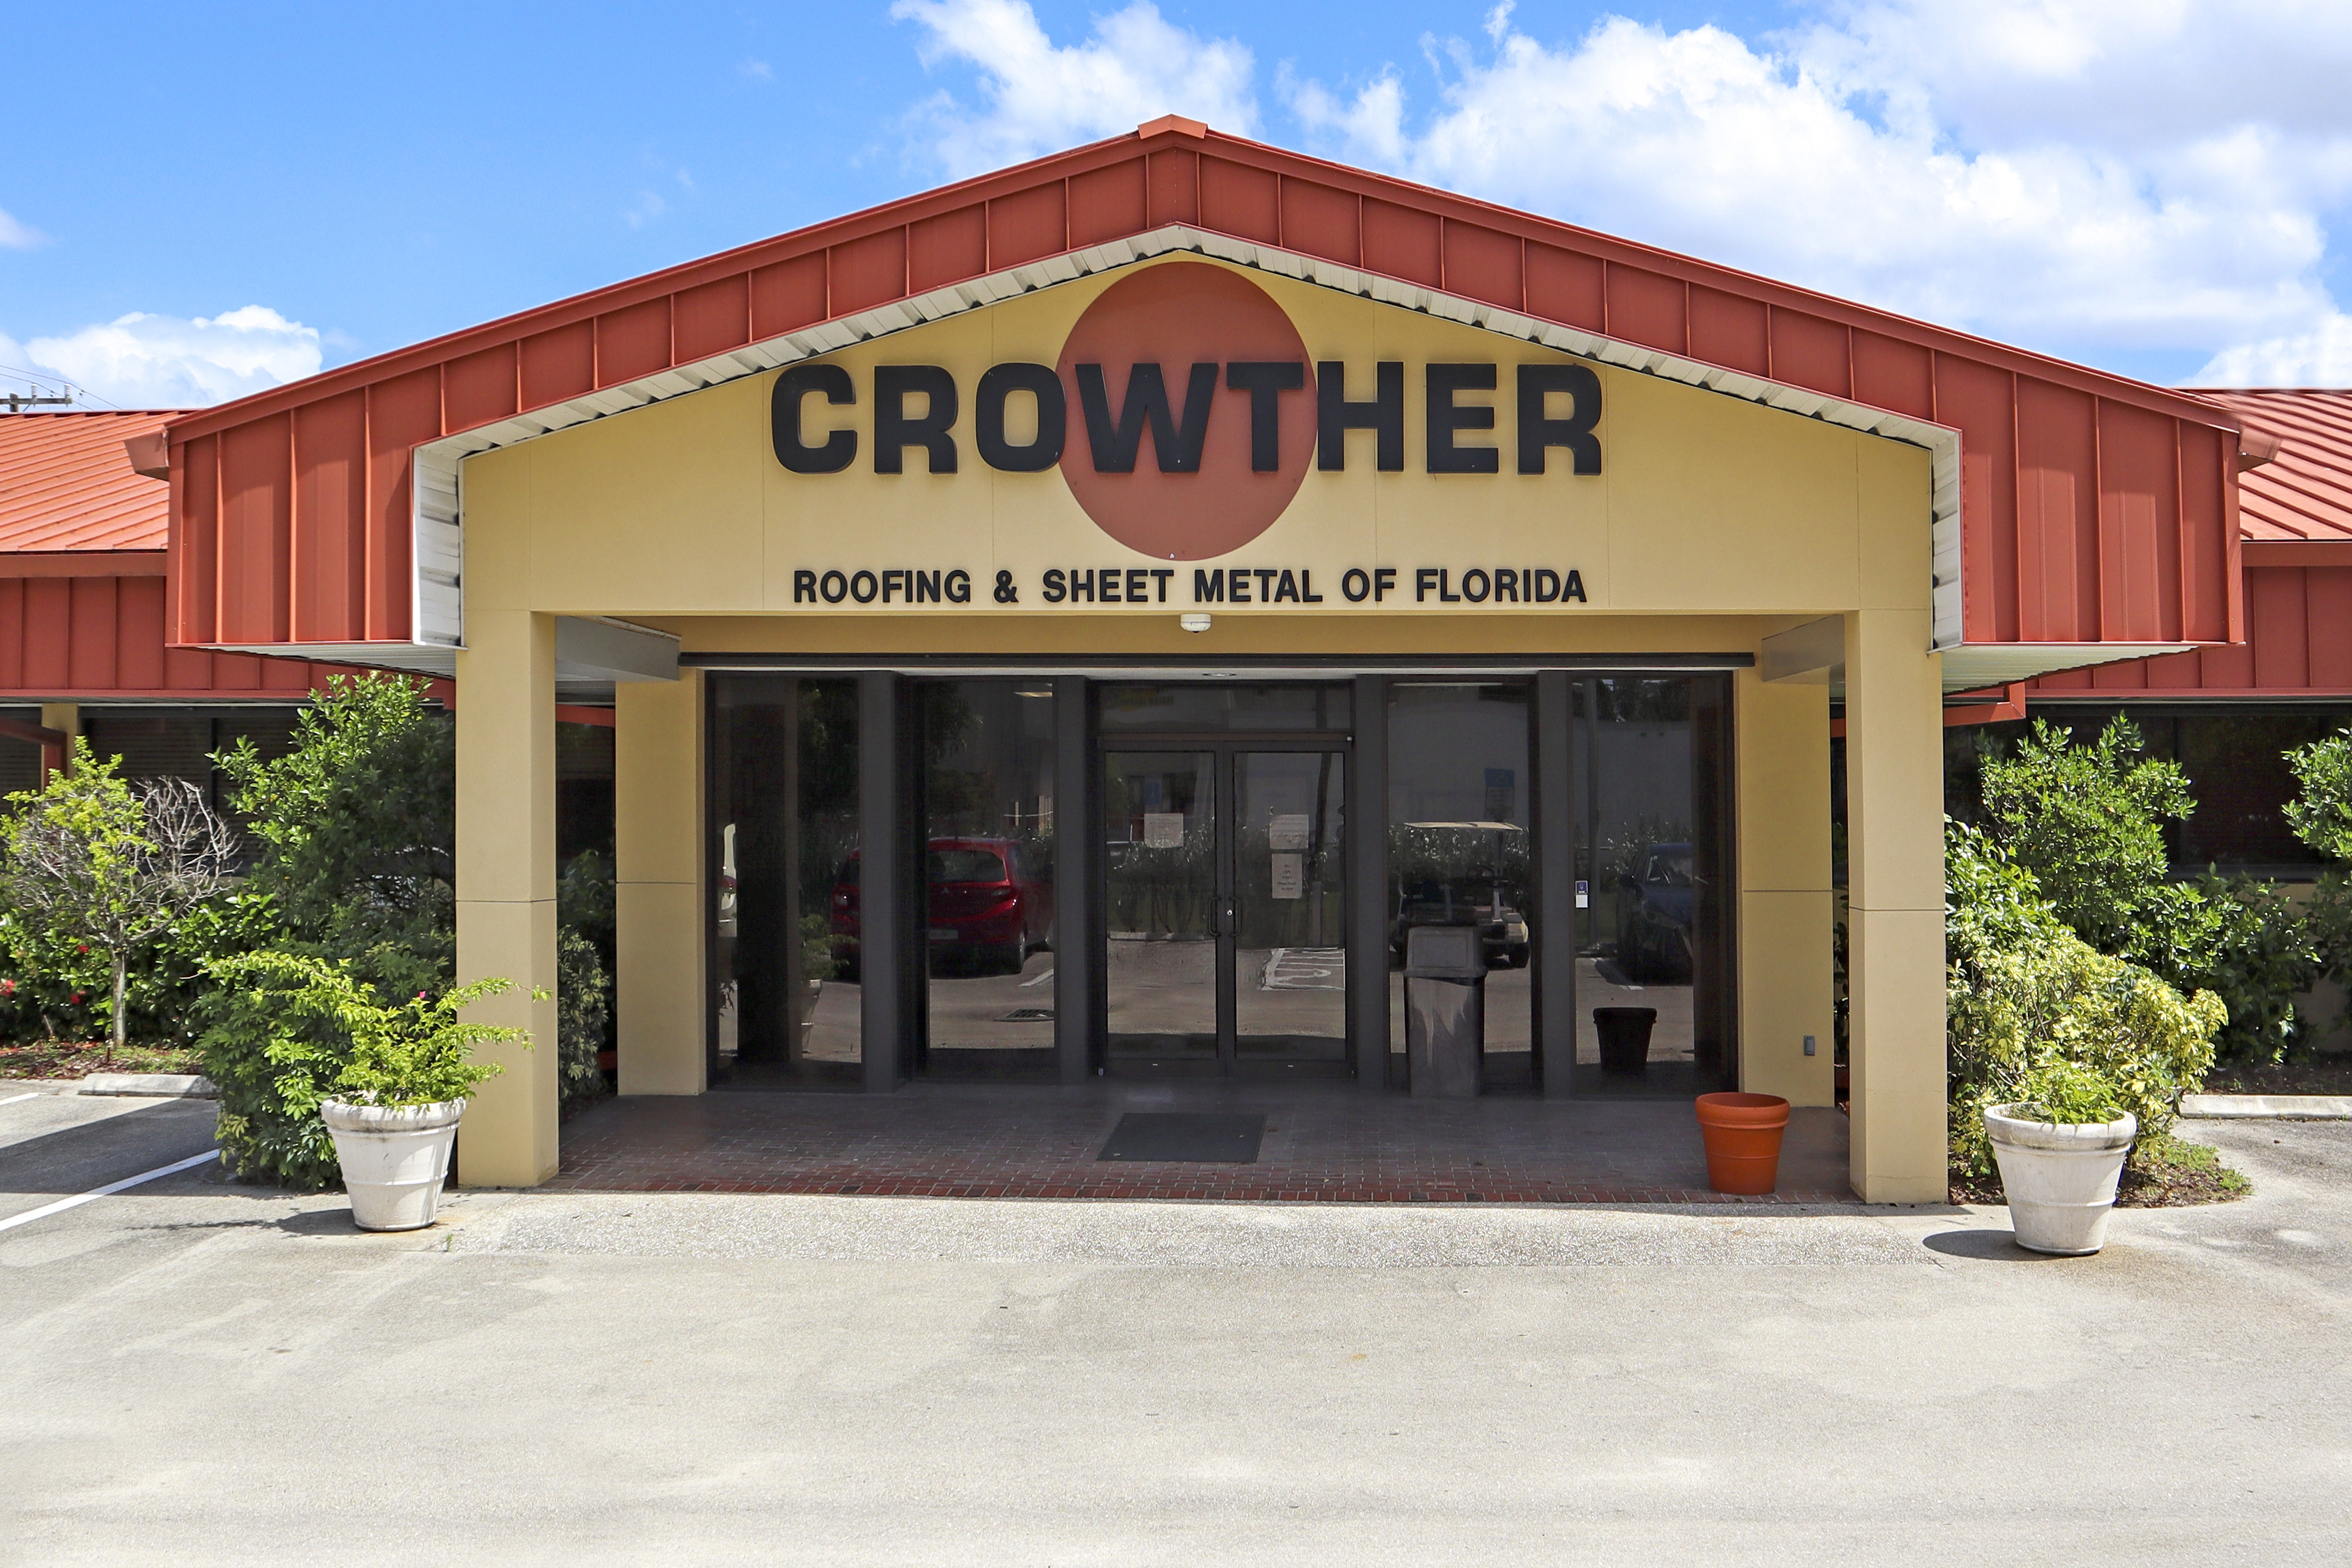 Crowther Roofing and Cooling office on Rockfill Rd. location